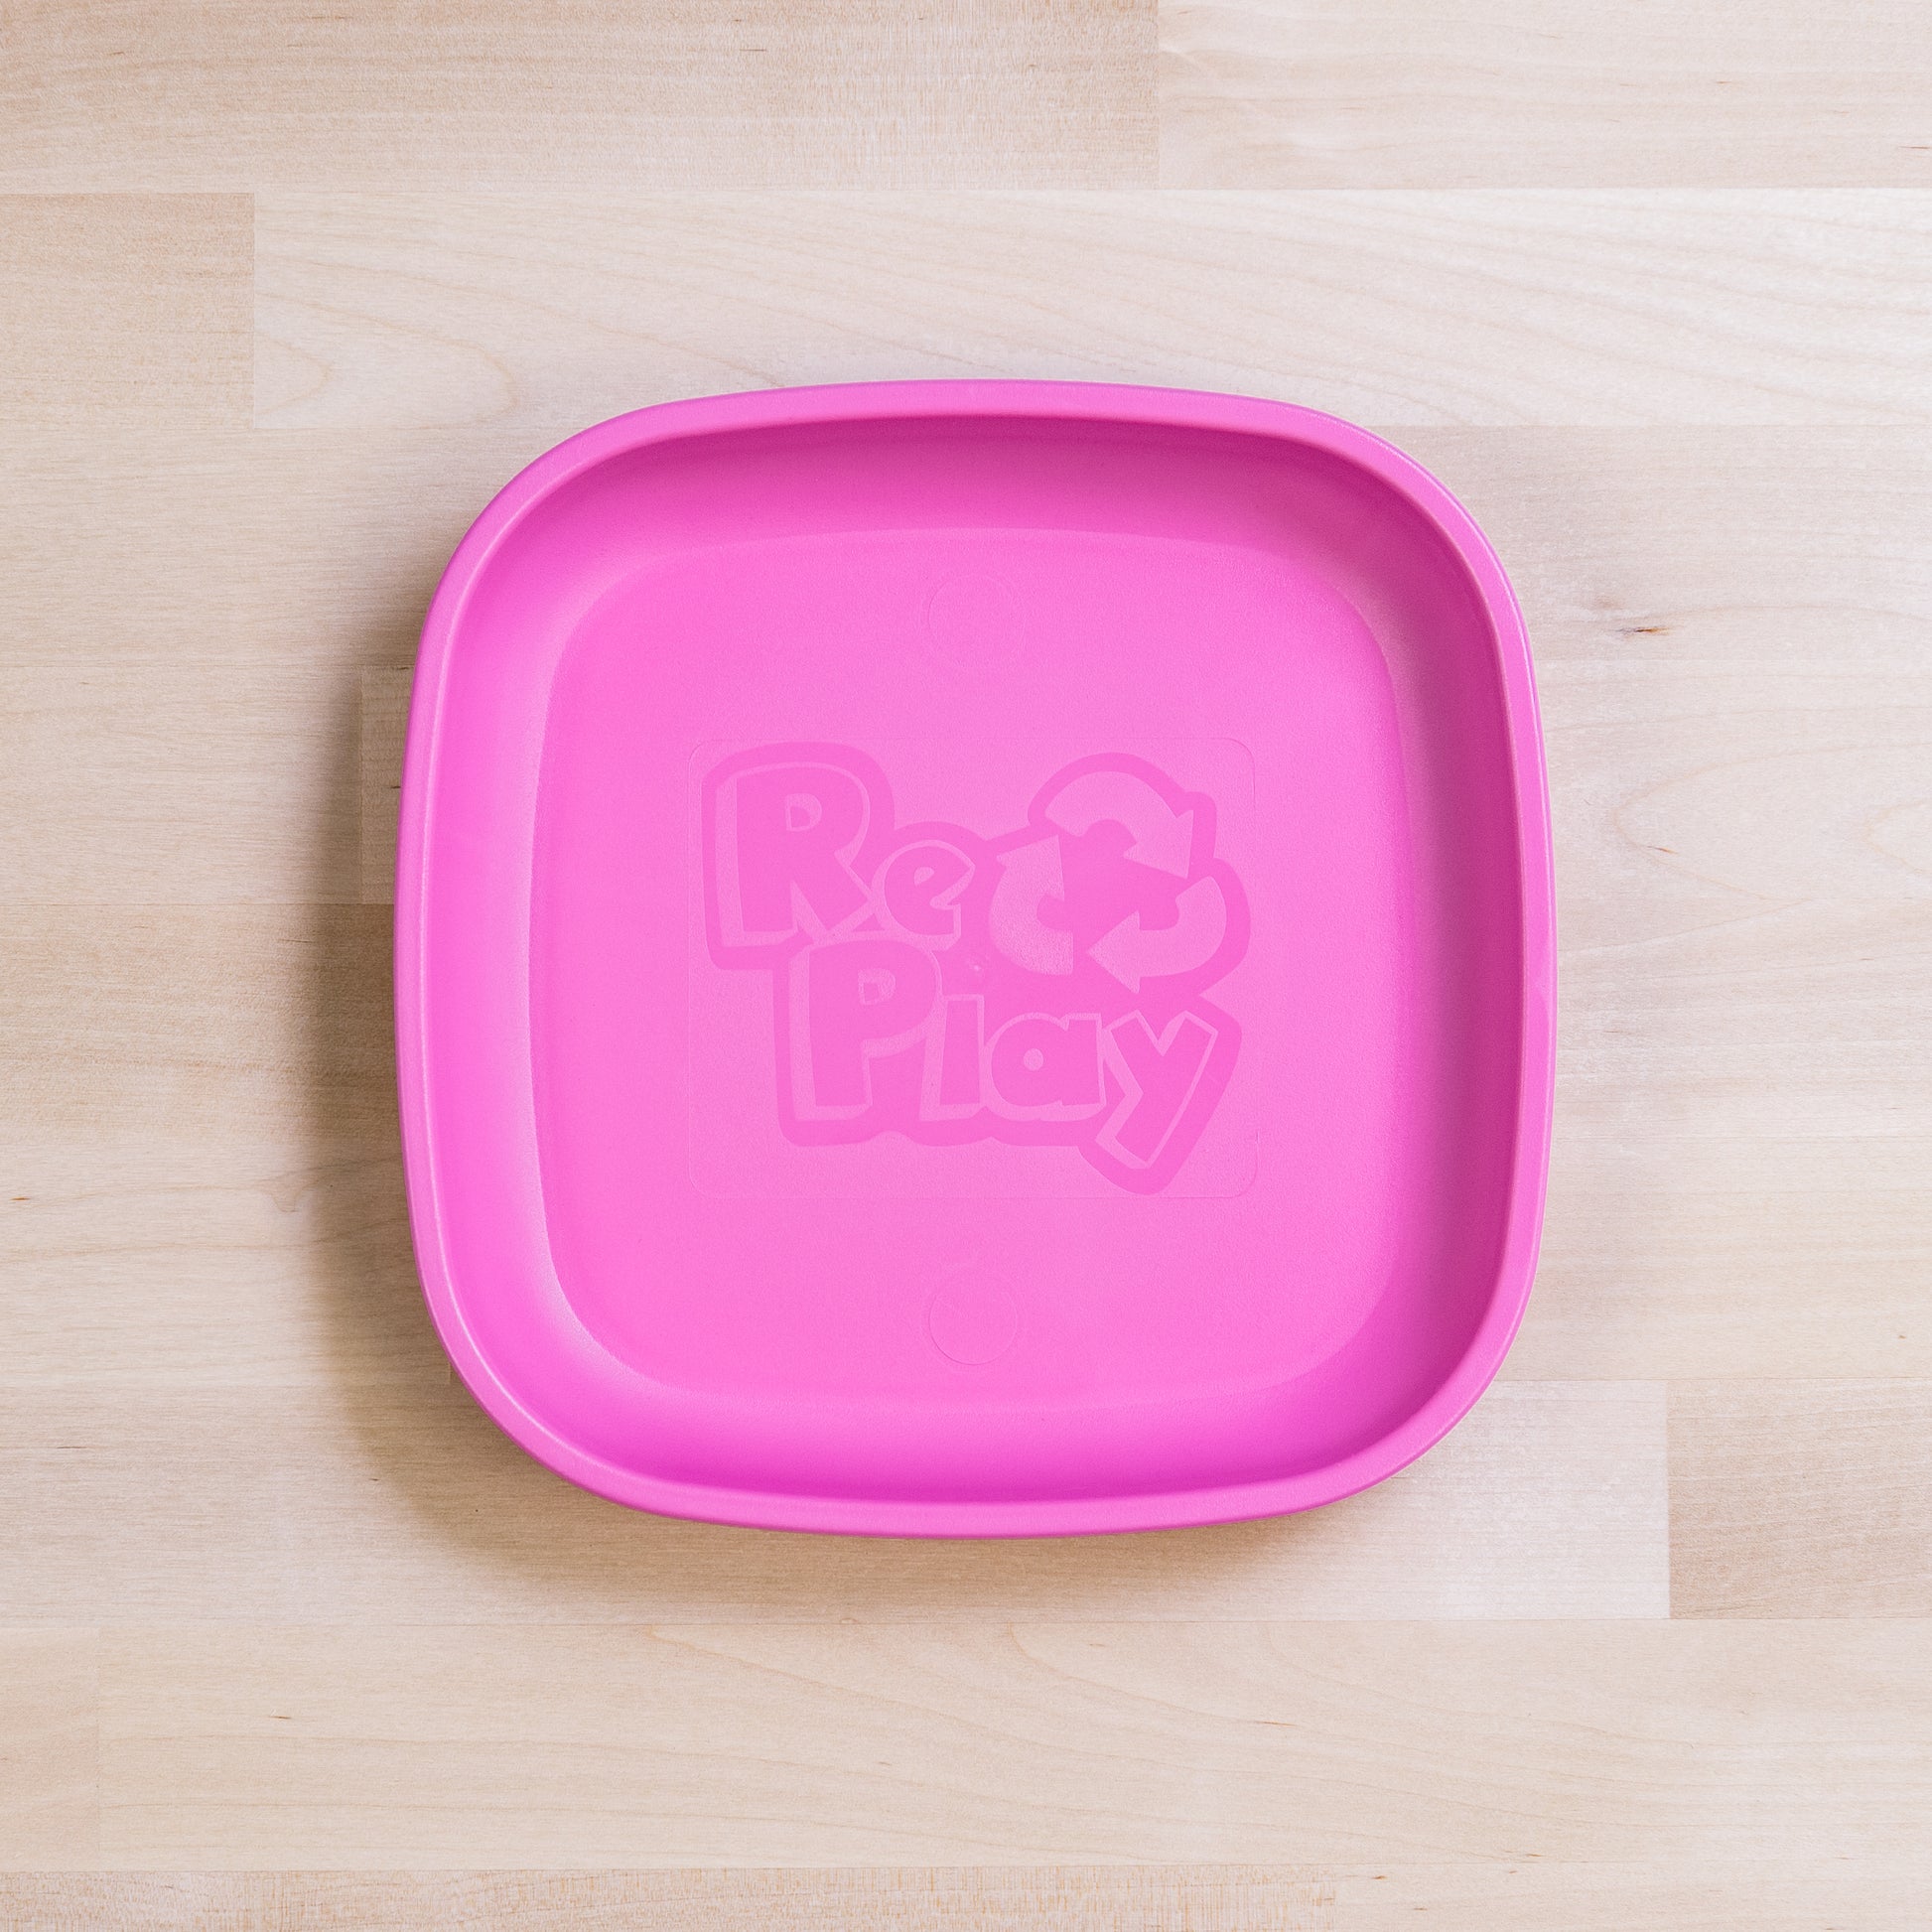 Re-Play Flat Plate Standard Size in Bright Pink from Bear & Moo